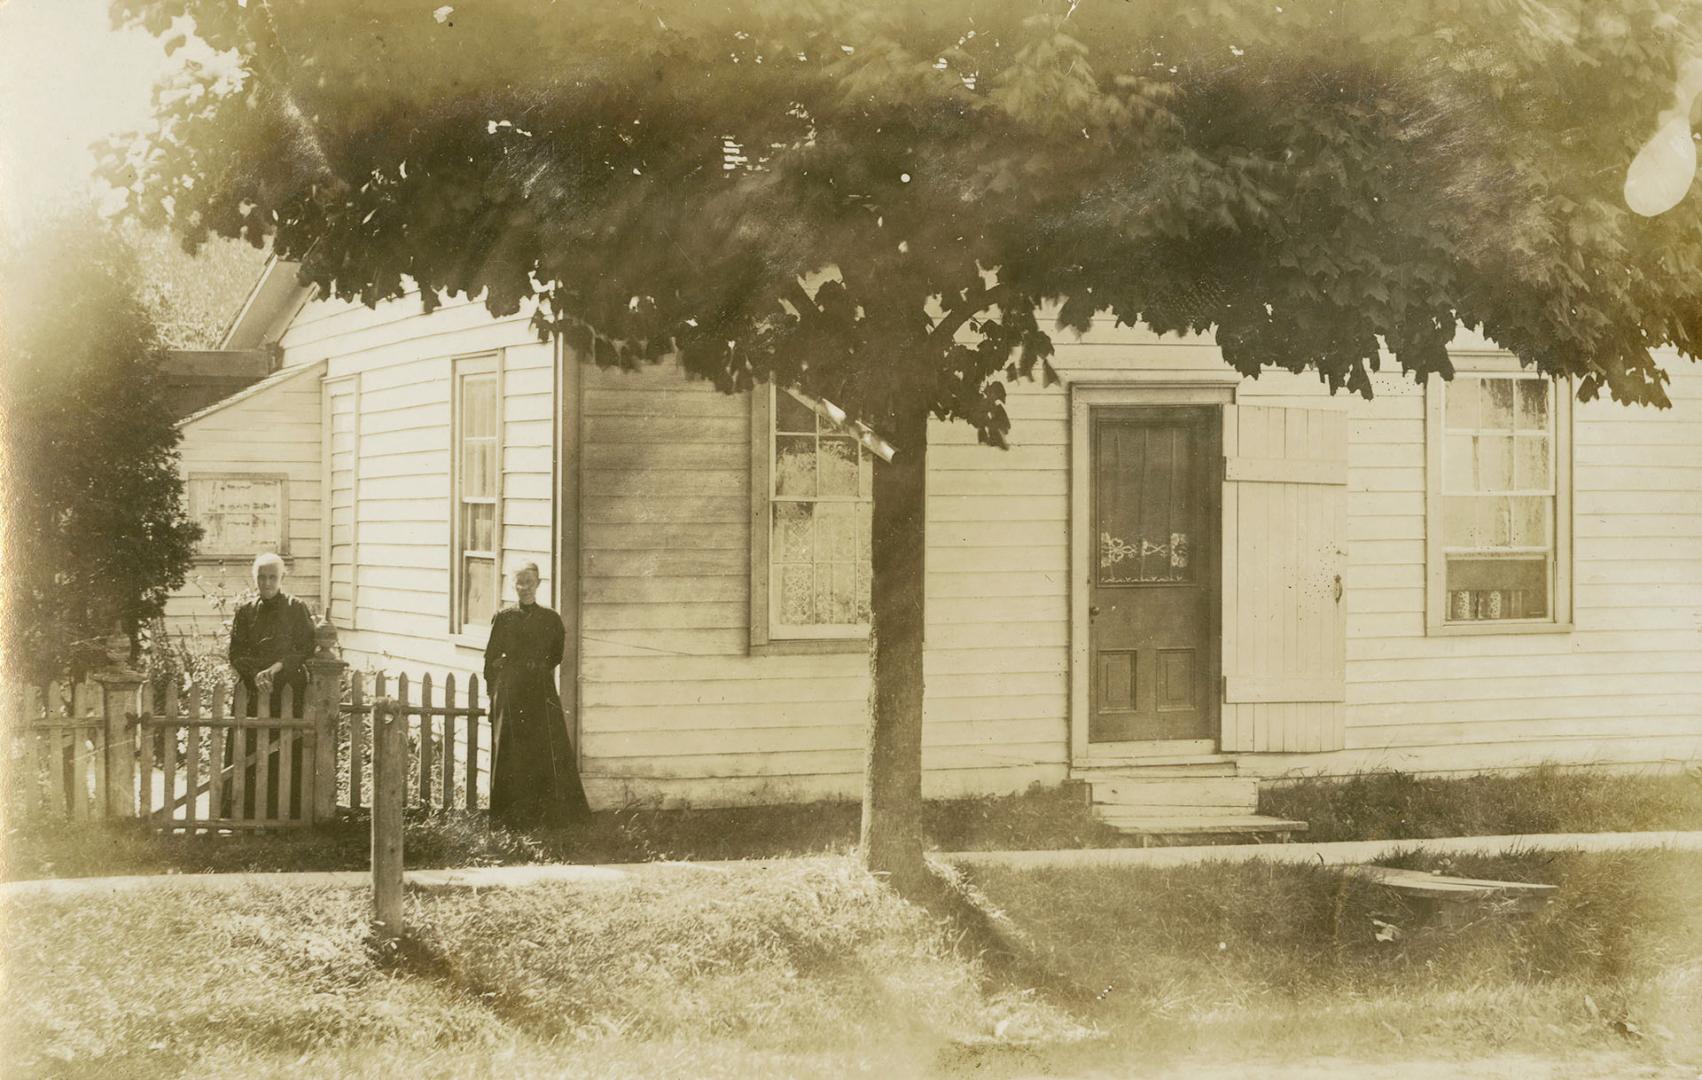 Black and white photograph of two women standing in front of a small, frame bungalow.